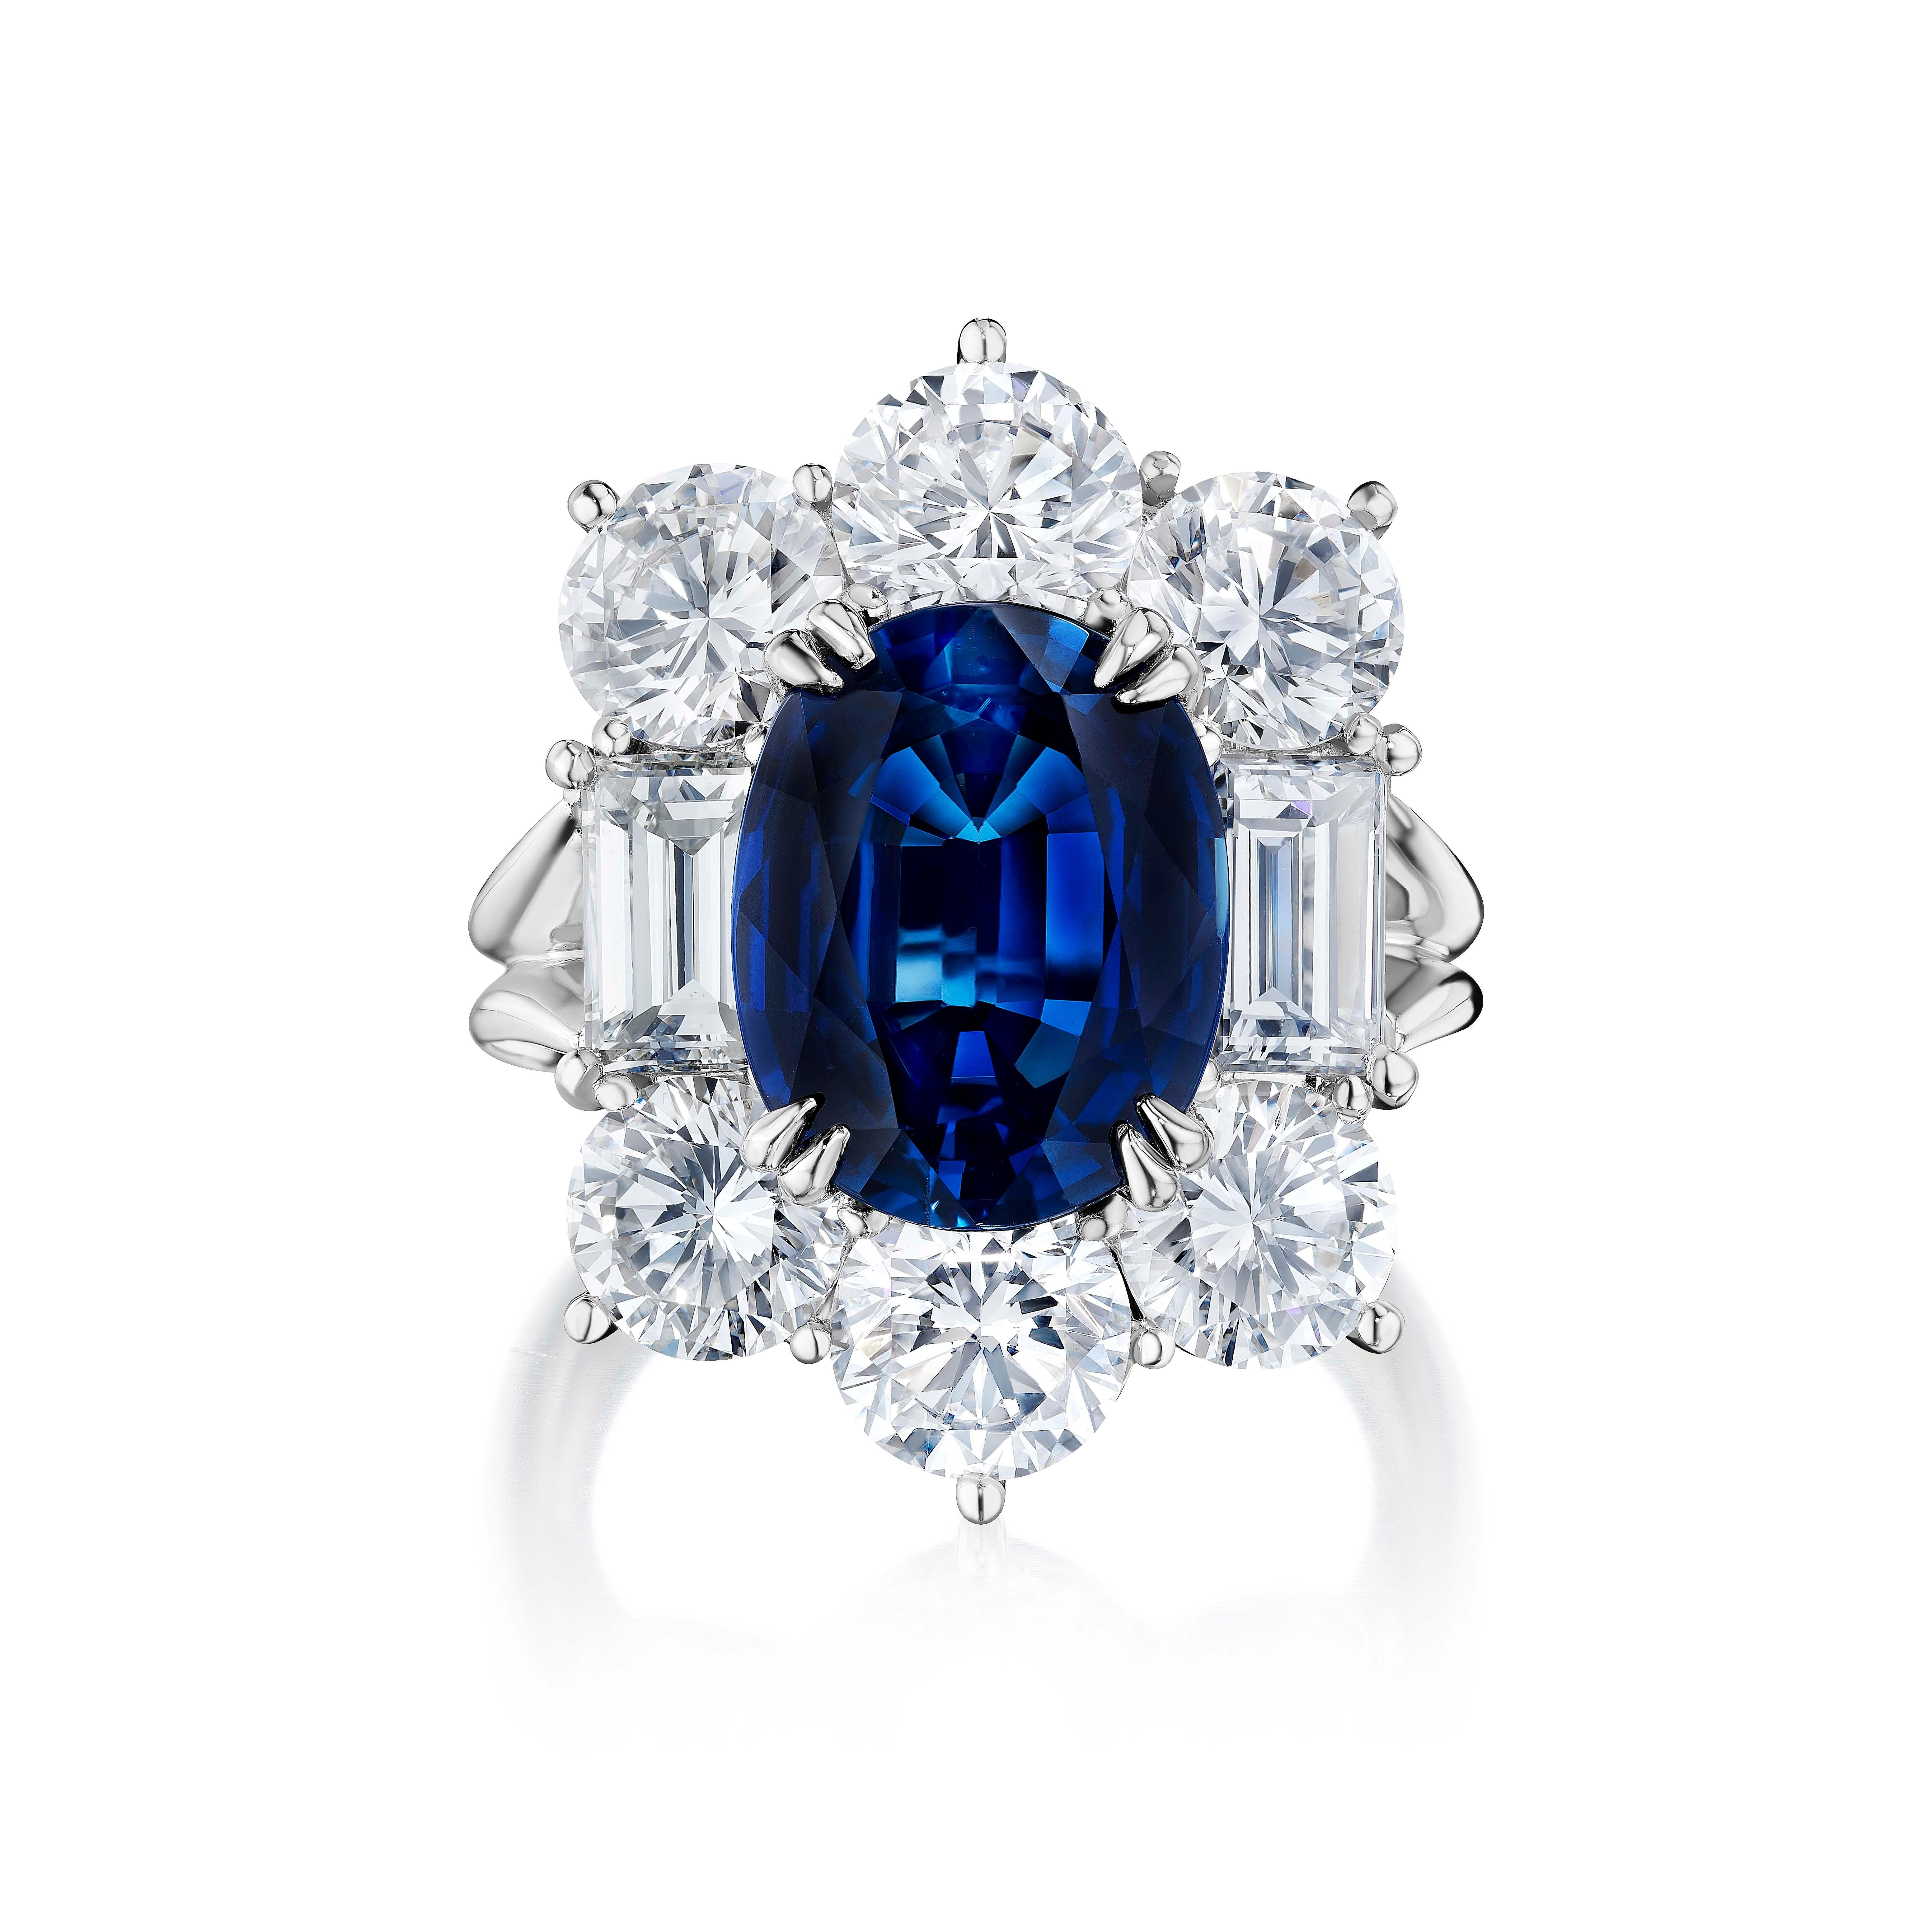 Oval Cut AGL Certified No Heat 6.3 Carat Sapphire and Diamond Ring For Sale